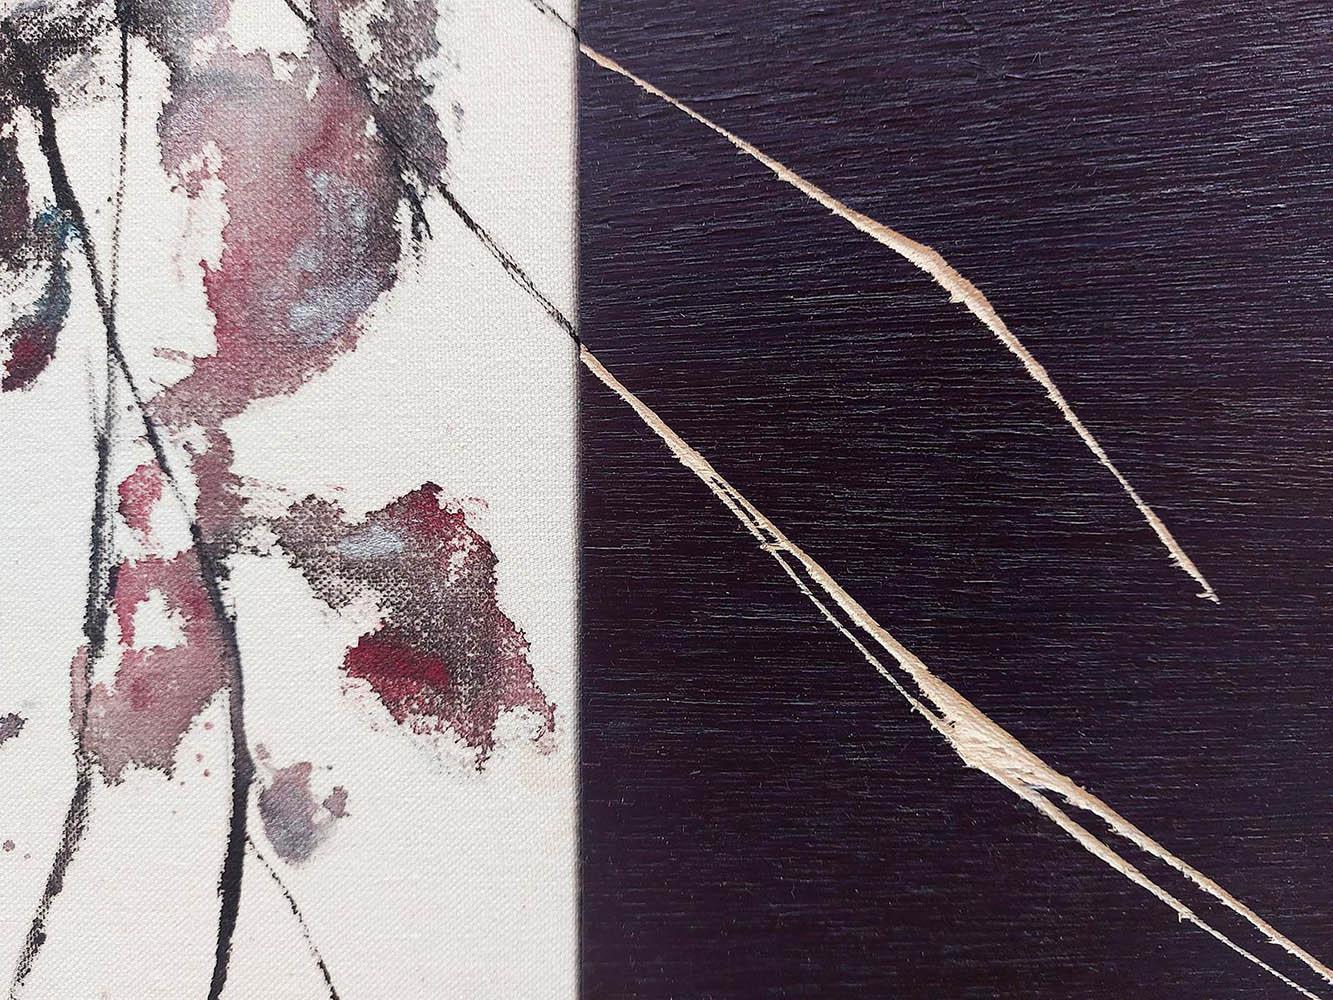 Dialogue with nature #21 by Maho Maeda - Abstract painting, flowers, pink, wood For Sale 3